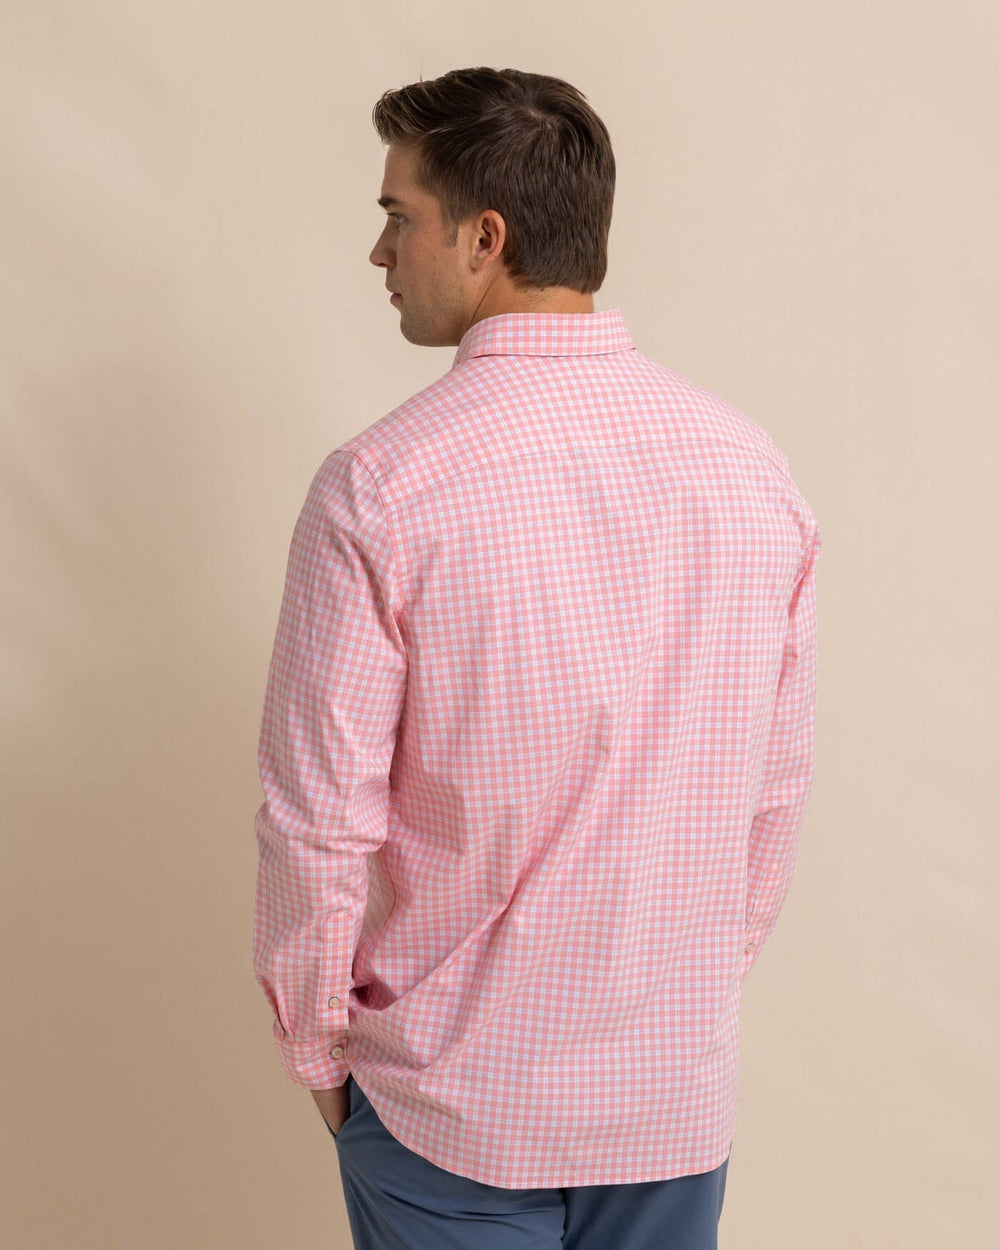 The back view of the Southern Tide Charleston Roanoke Check Long Sleeve Sport Shirt by Southern Tide - Flamingo Pink